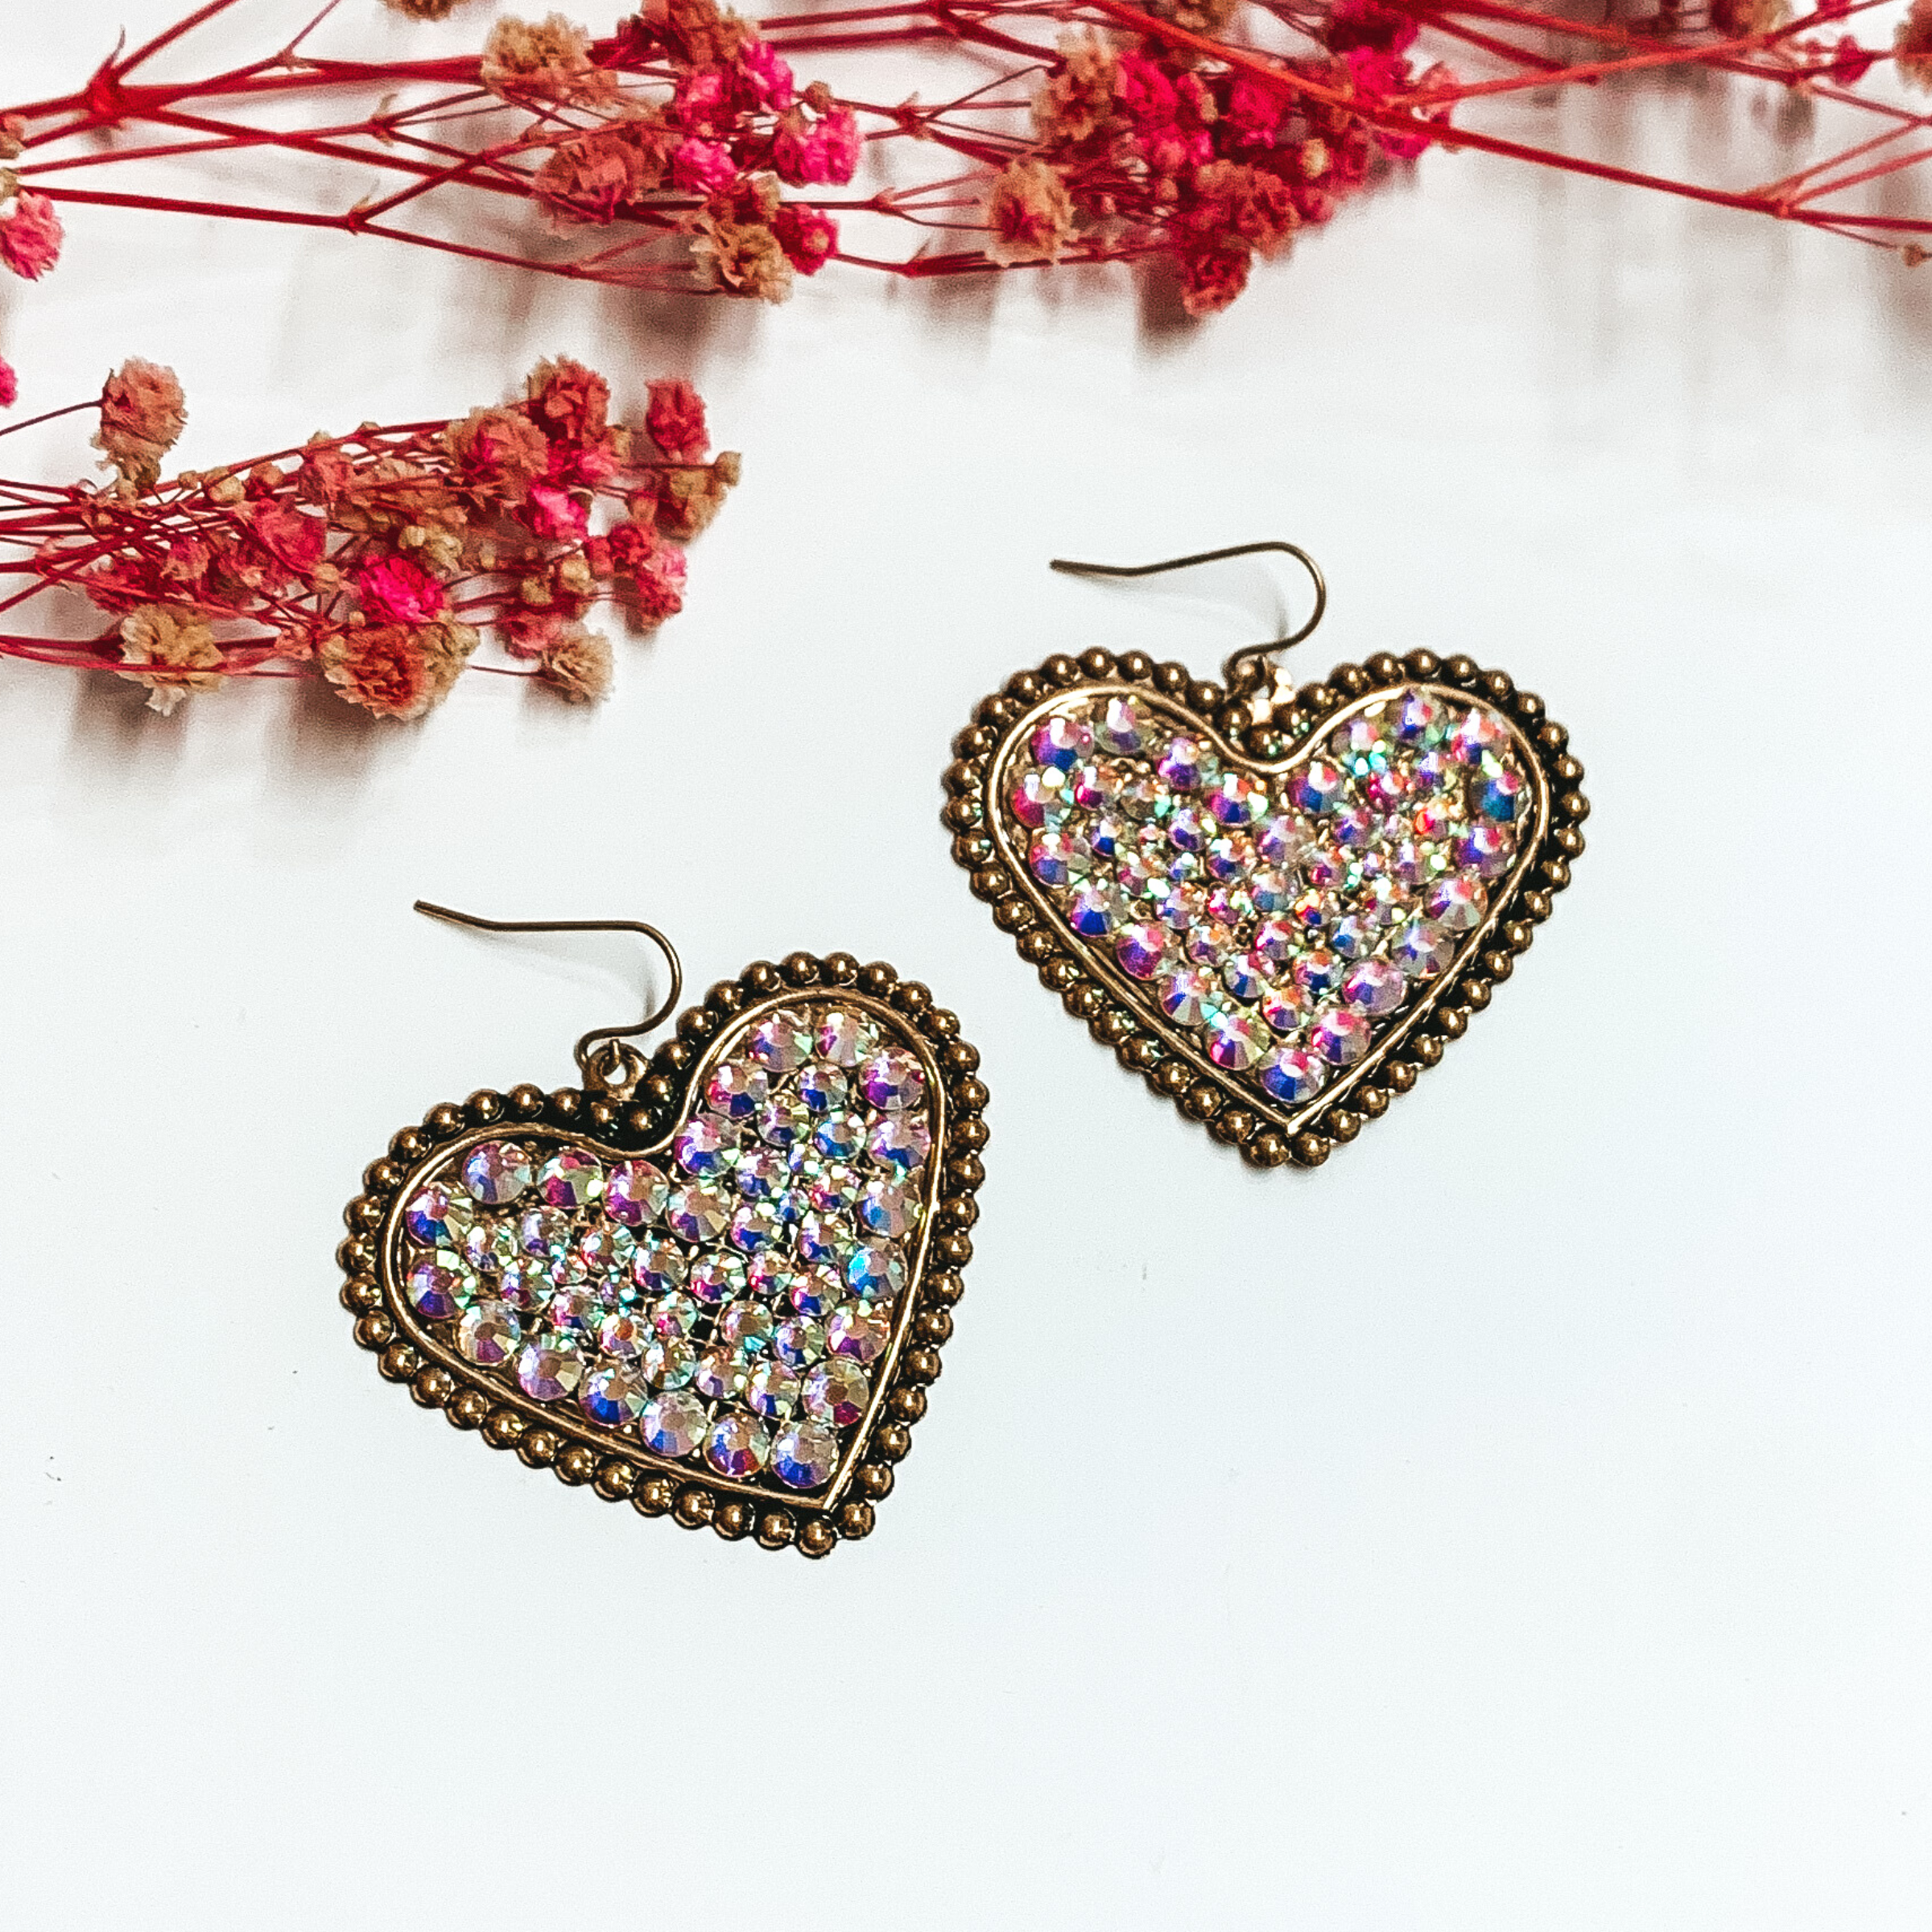 Bronze heart dangle earrings encrusted with ab crystals. These earrings are pictured on a white background with small pink flowers at the top of the picture. 